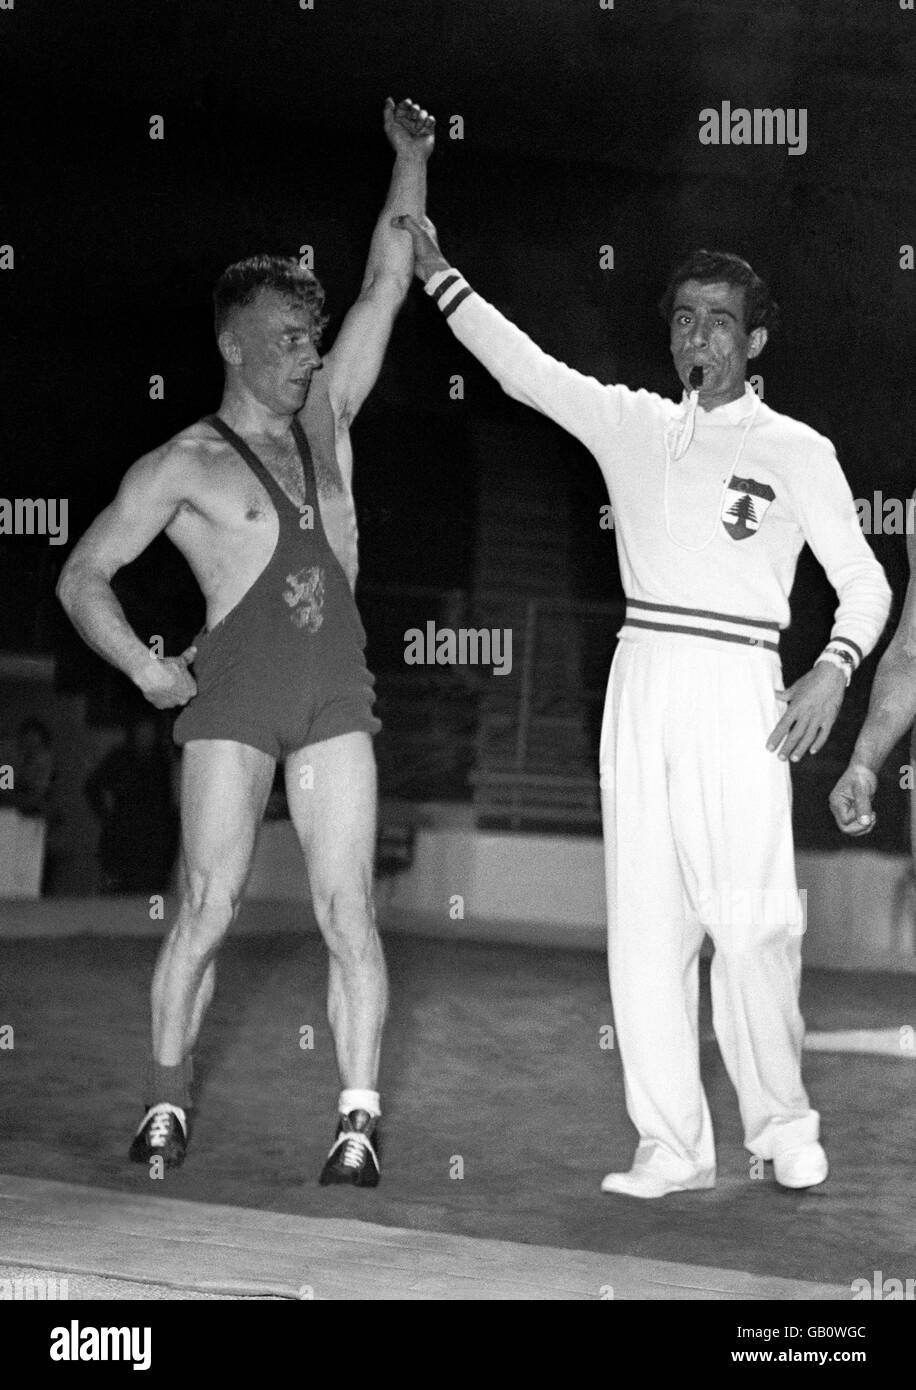 London Olympic Games 1948 - Wrestling - Earls Court. Stock shot of one of the winners being proclaimed after a Greco-Roman style wrestling match. Stock Photo